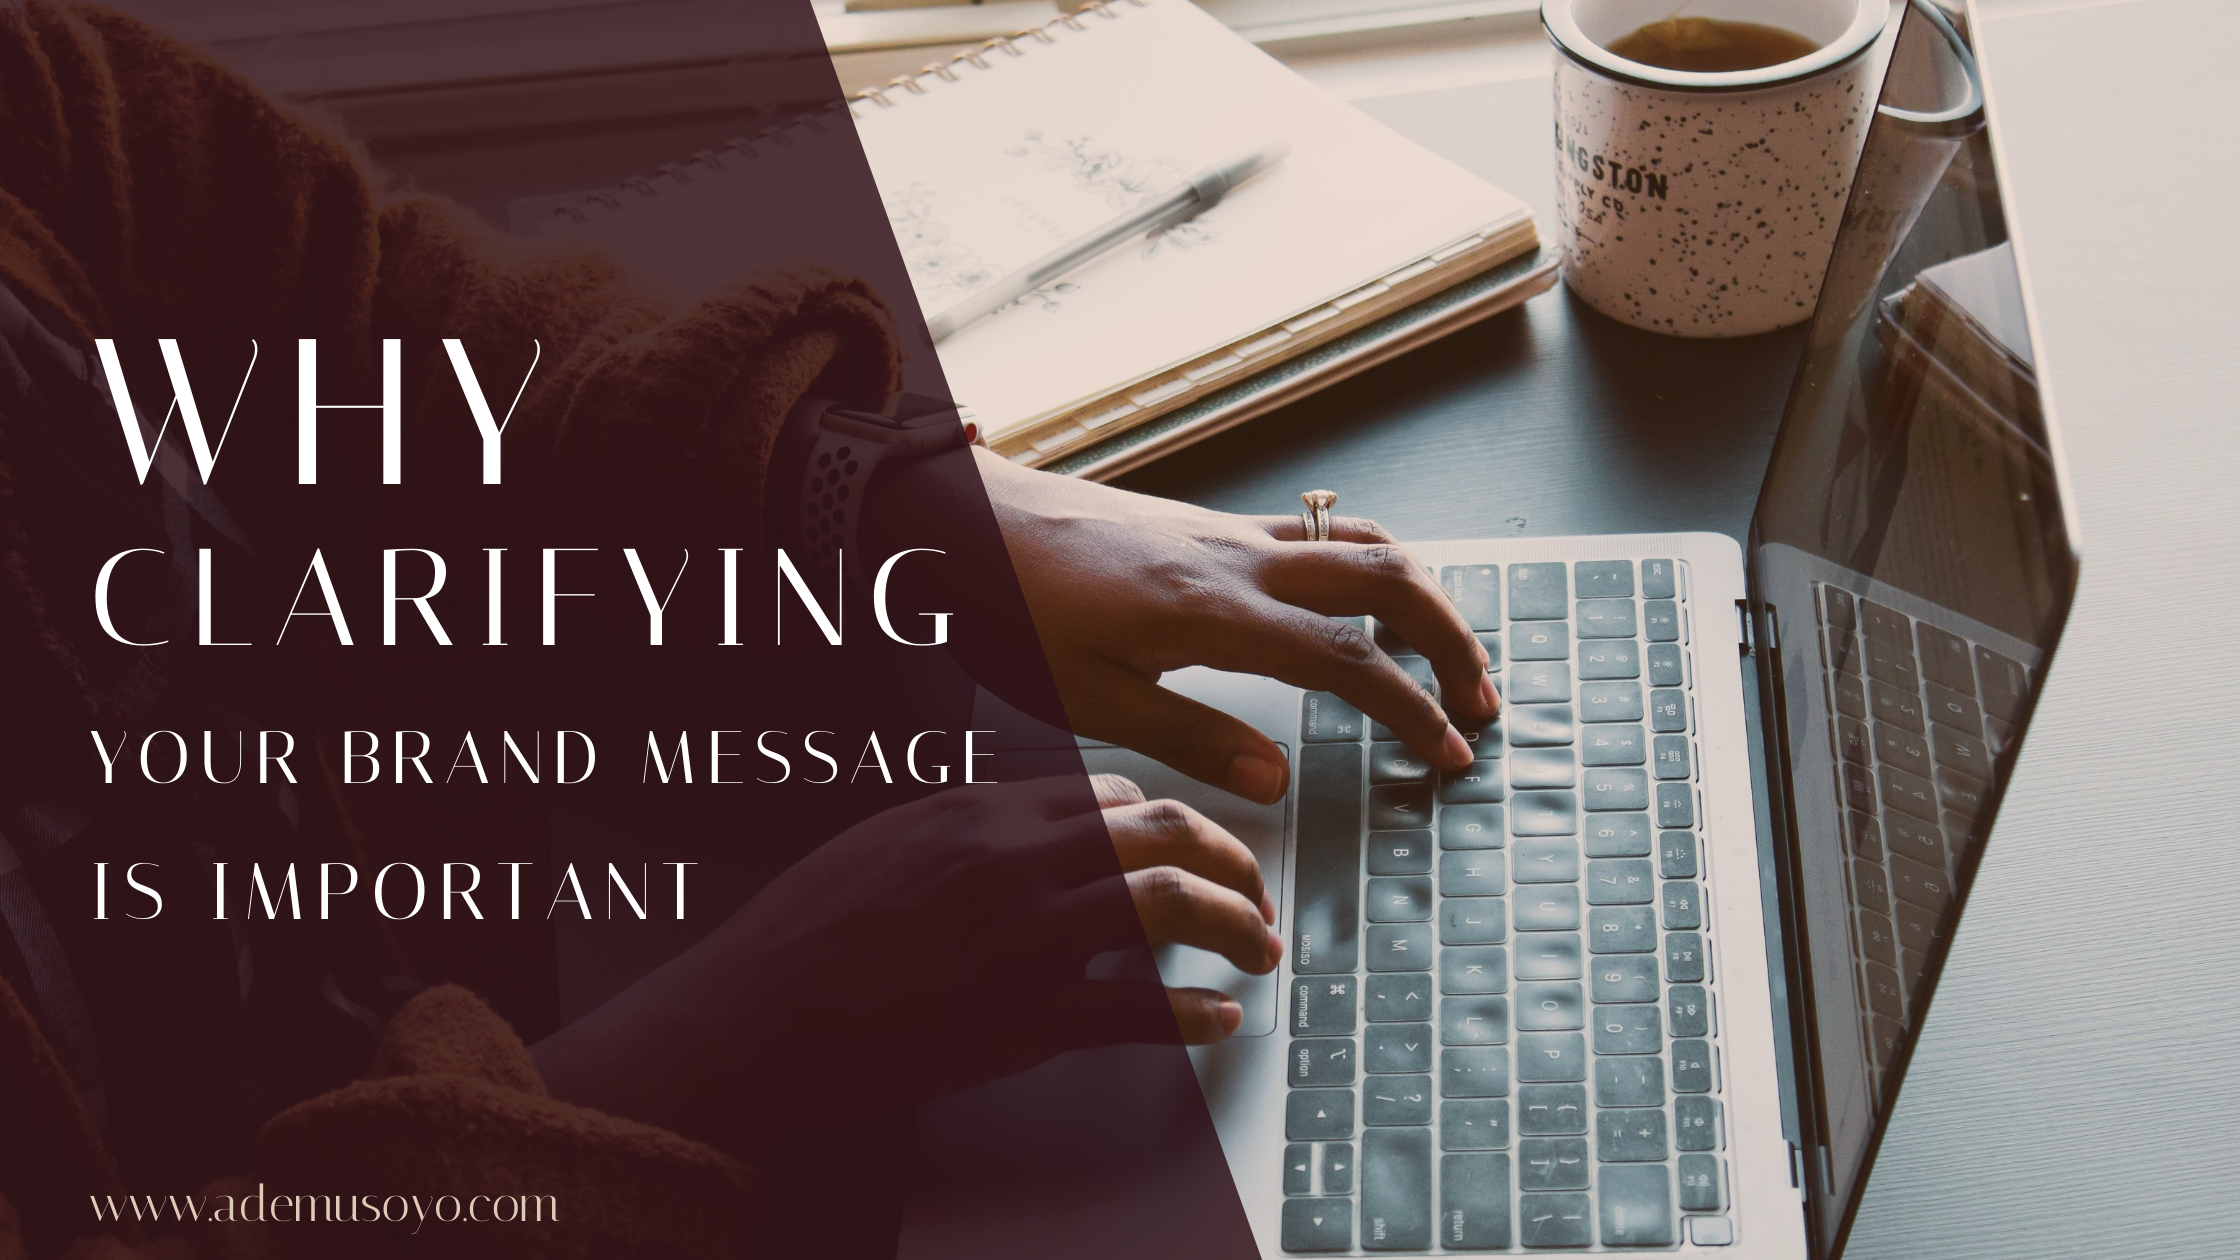 In this blog post, Ademusoyo talks about why clarifying your brand message is important. brand messaging, brand message strategy, brand messaging tips brand message tips, clarifying brand message, clarifying messaging